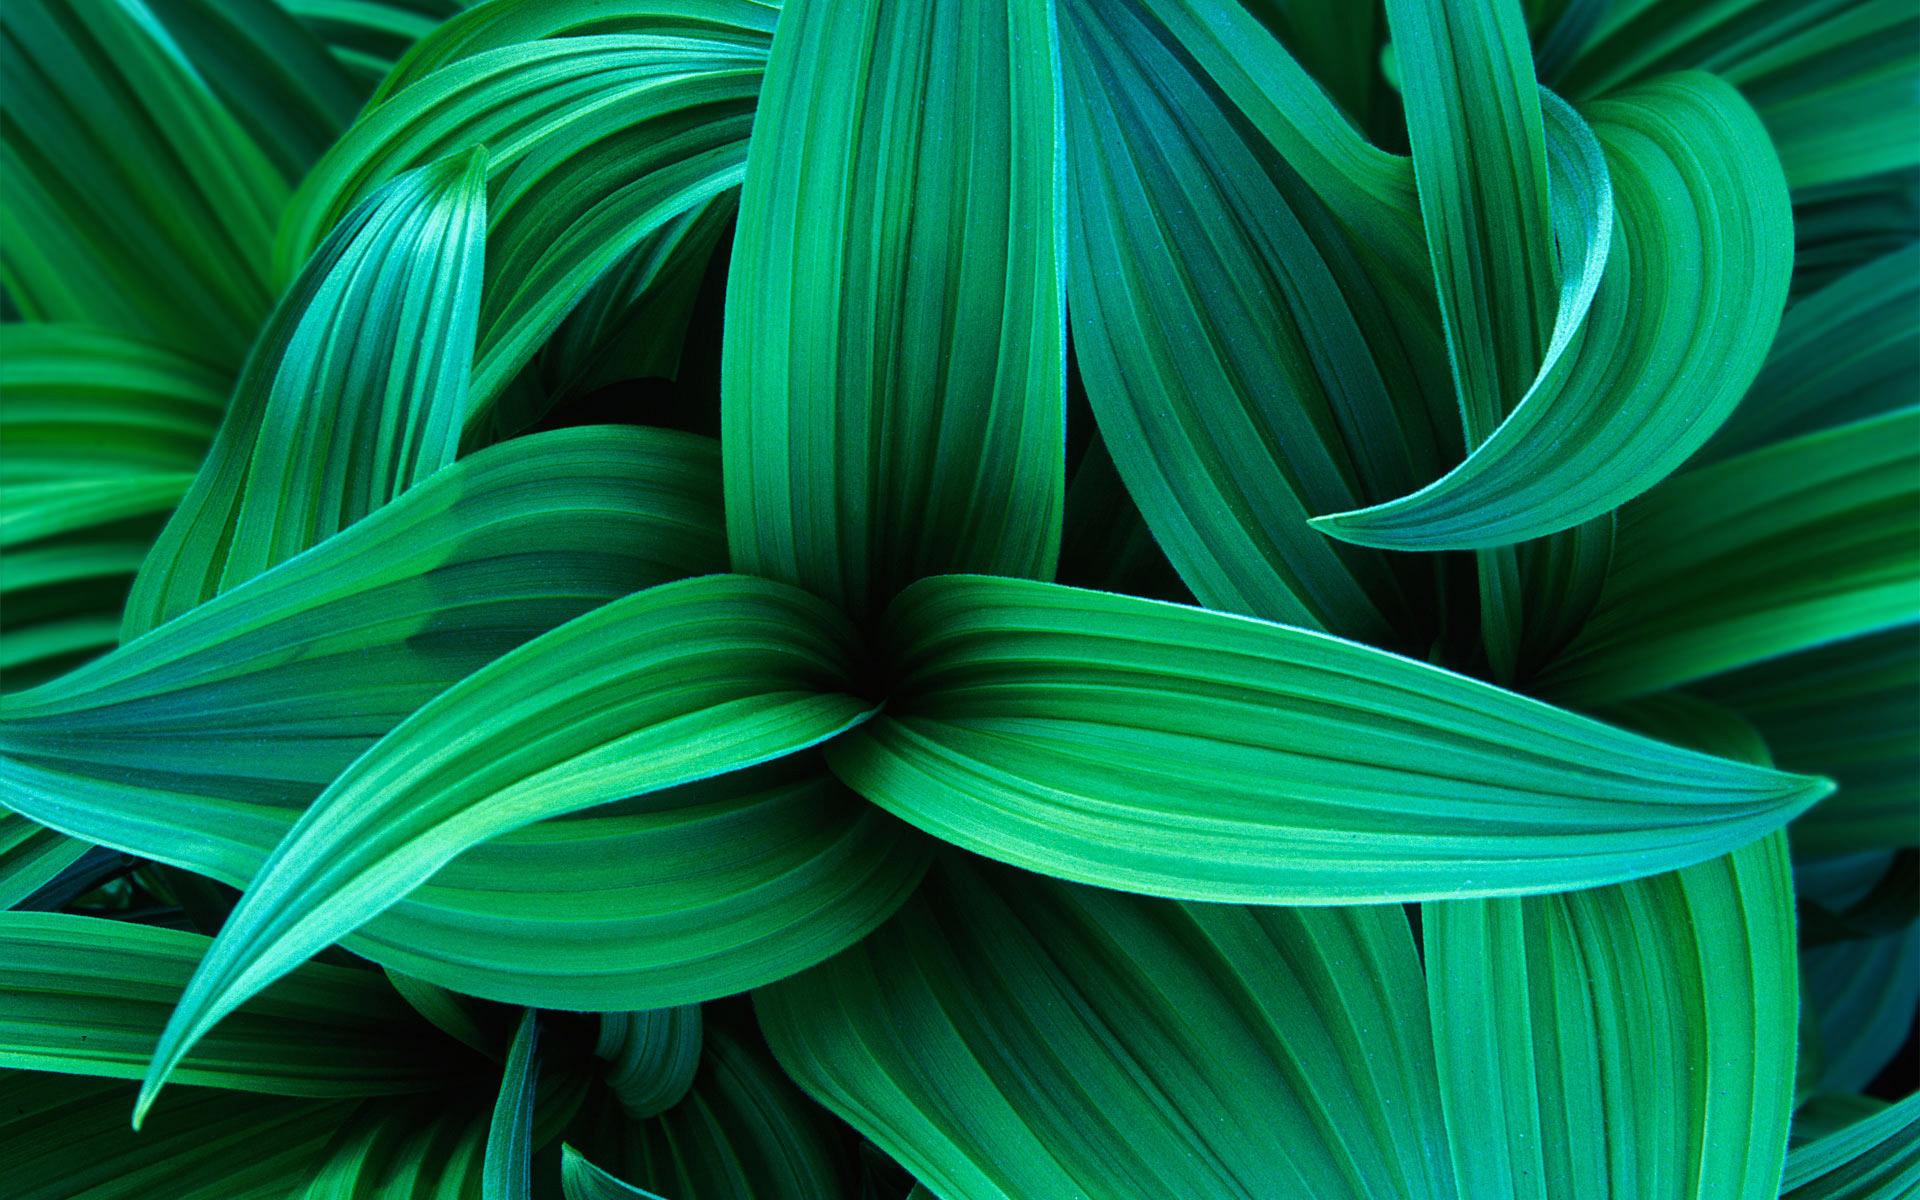 Wallpaper Featuring Realistic Leaves